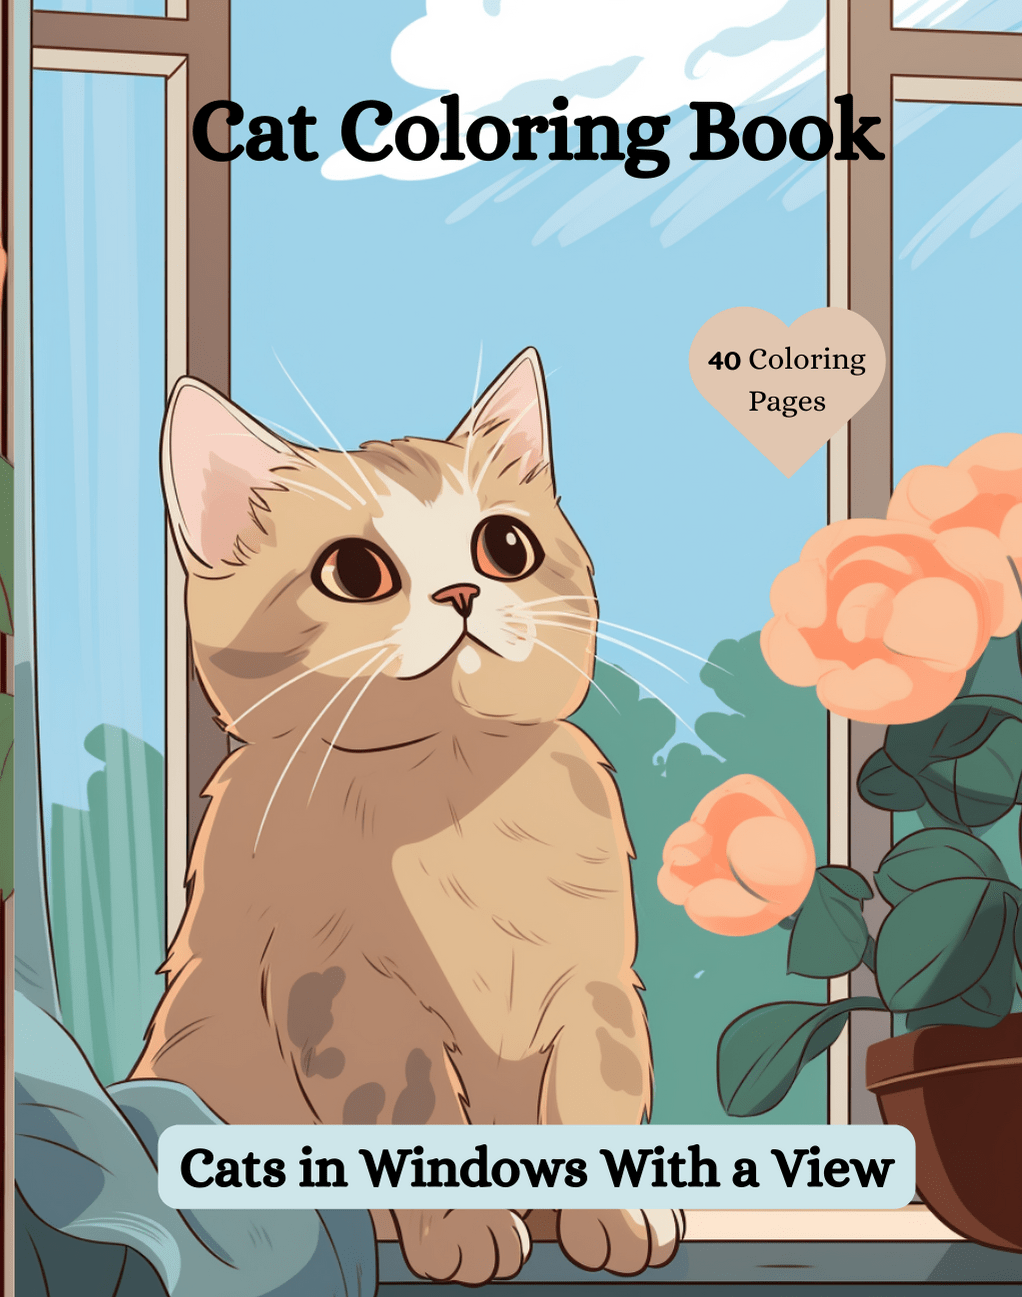 Cat Coloring Book | Cats in Windows With a View